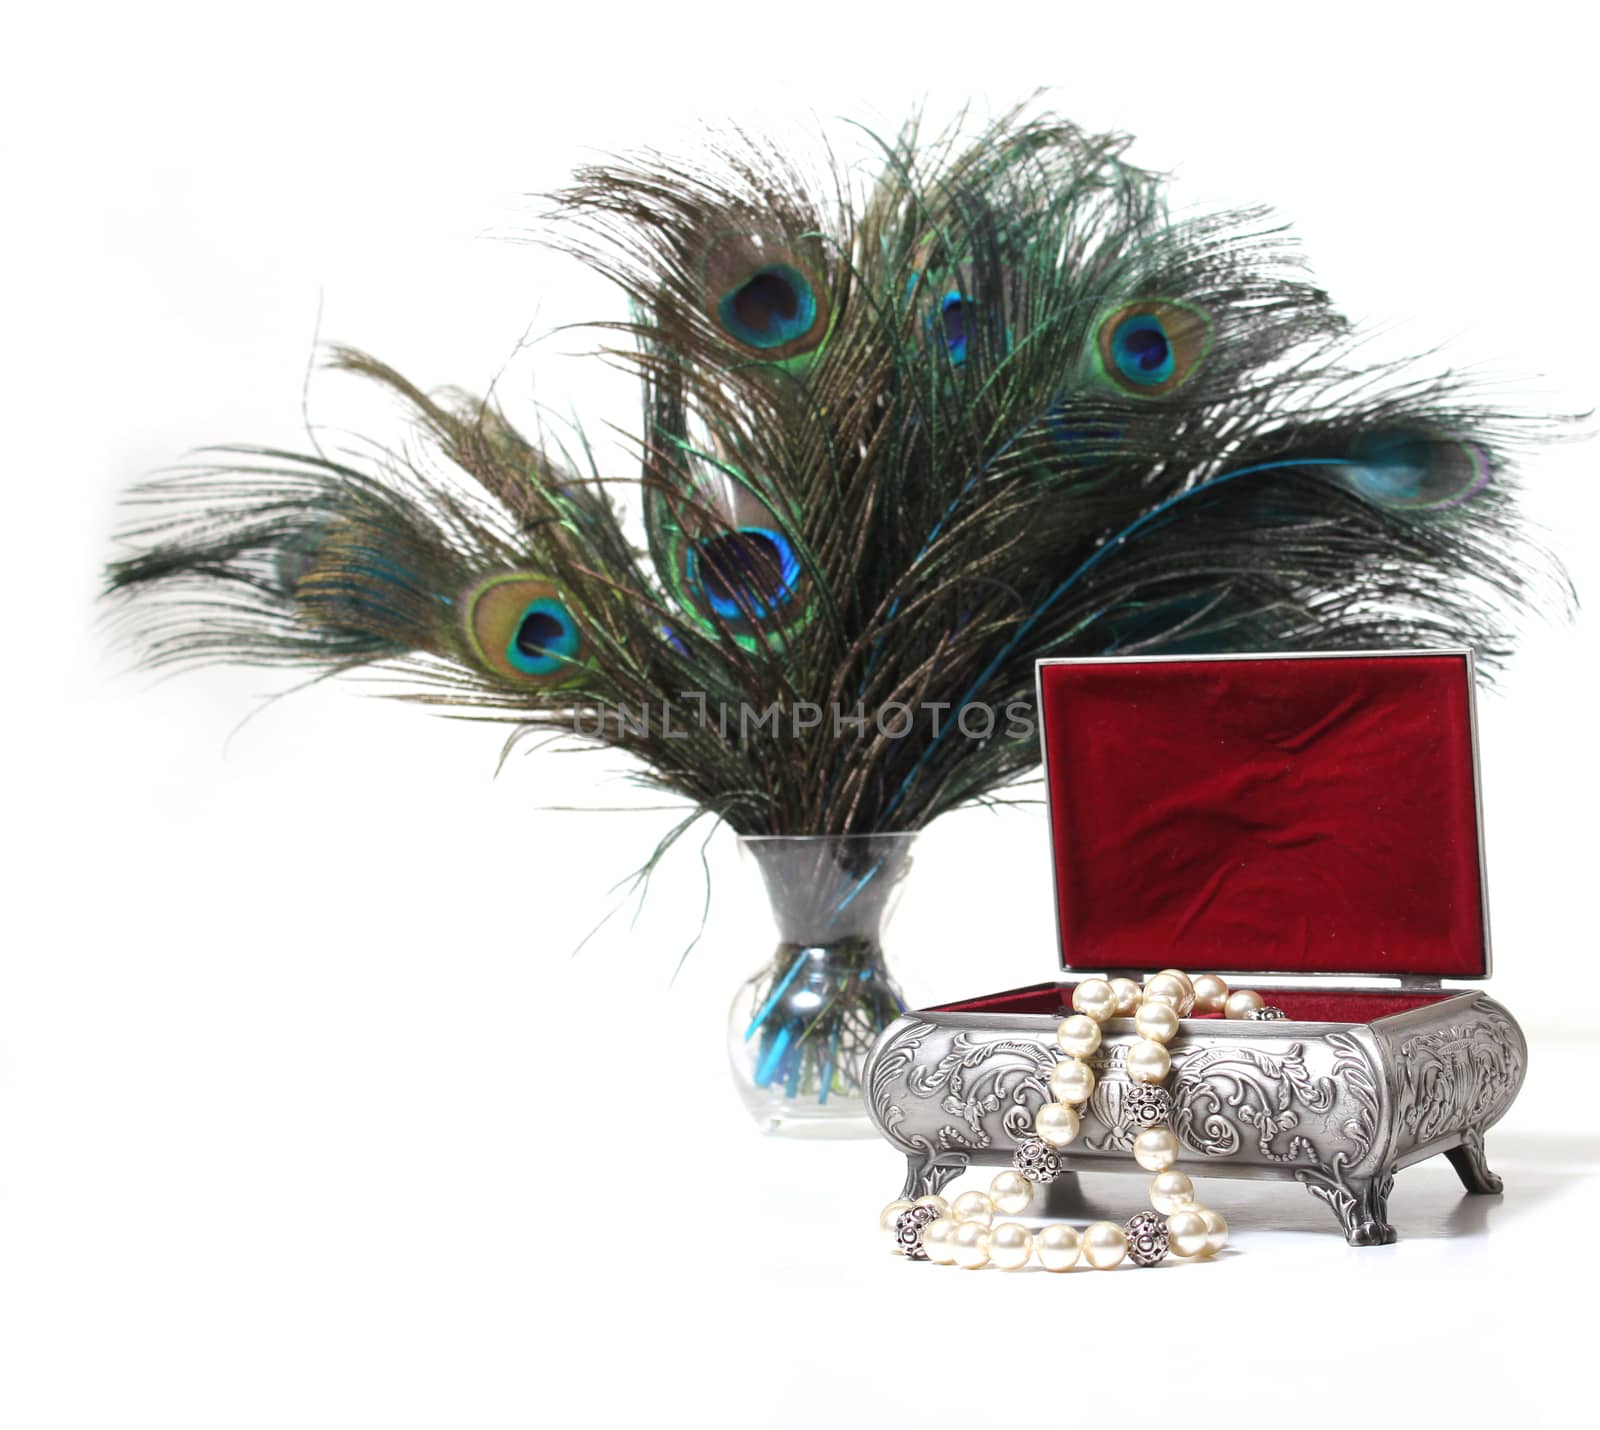 Vintage Jewelry Box With Pearls and Peacock Feathers